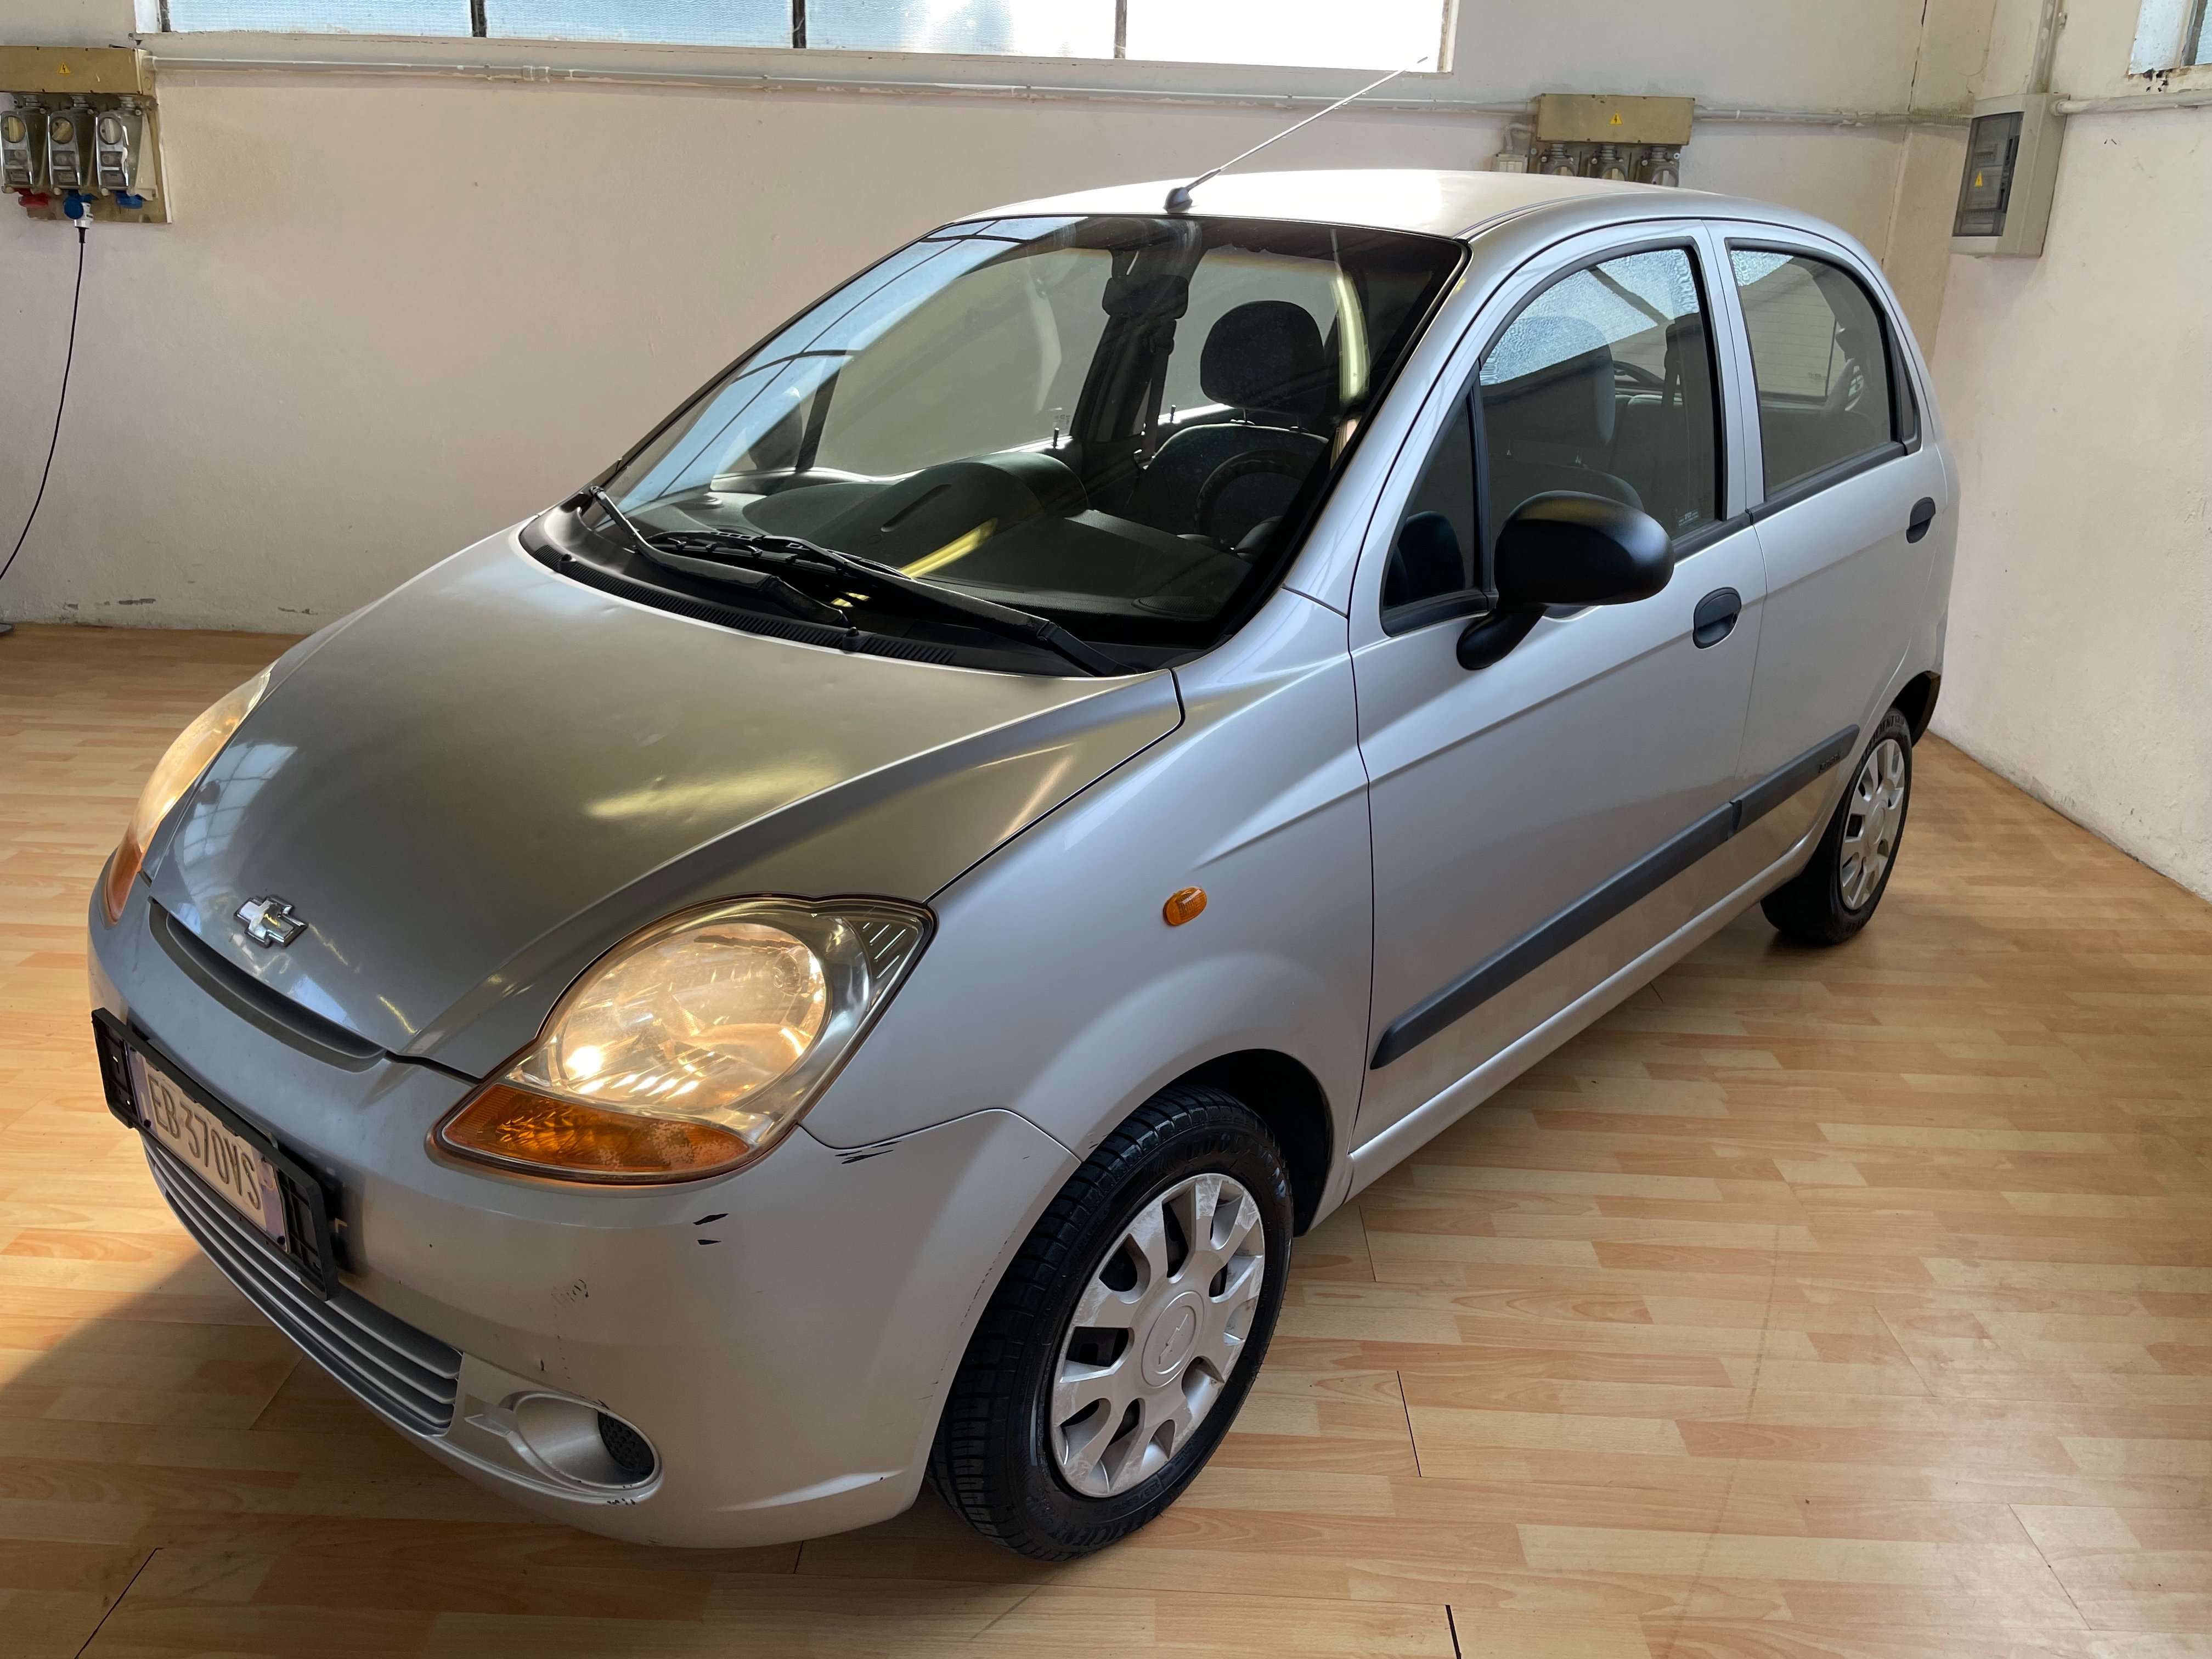 Chevrolet Matiz Compact in Grey used in Galbiate  - Lc for € 2,700.-